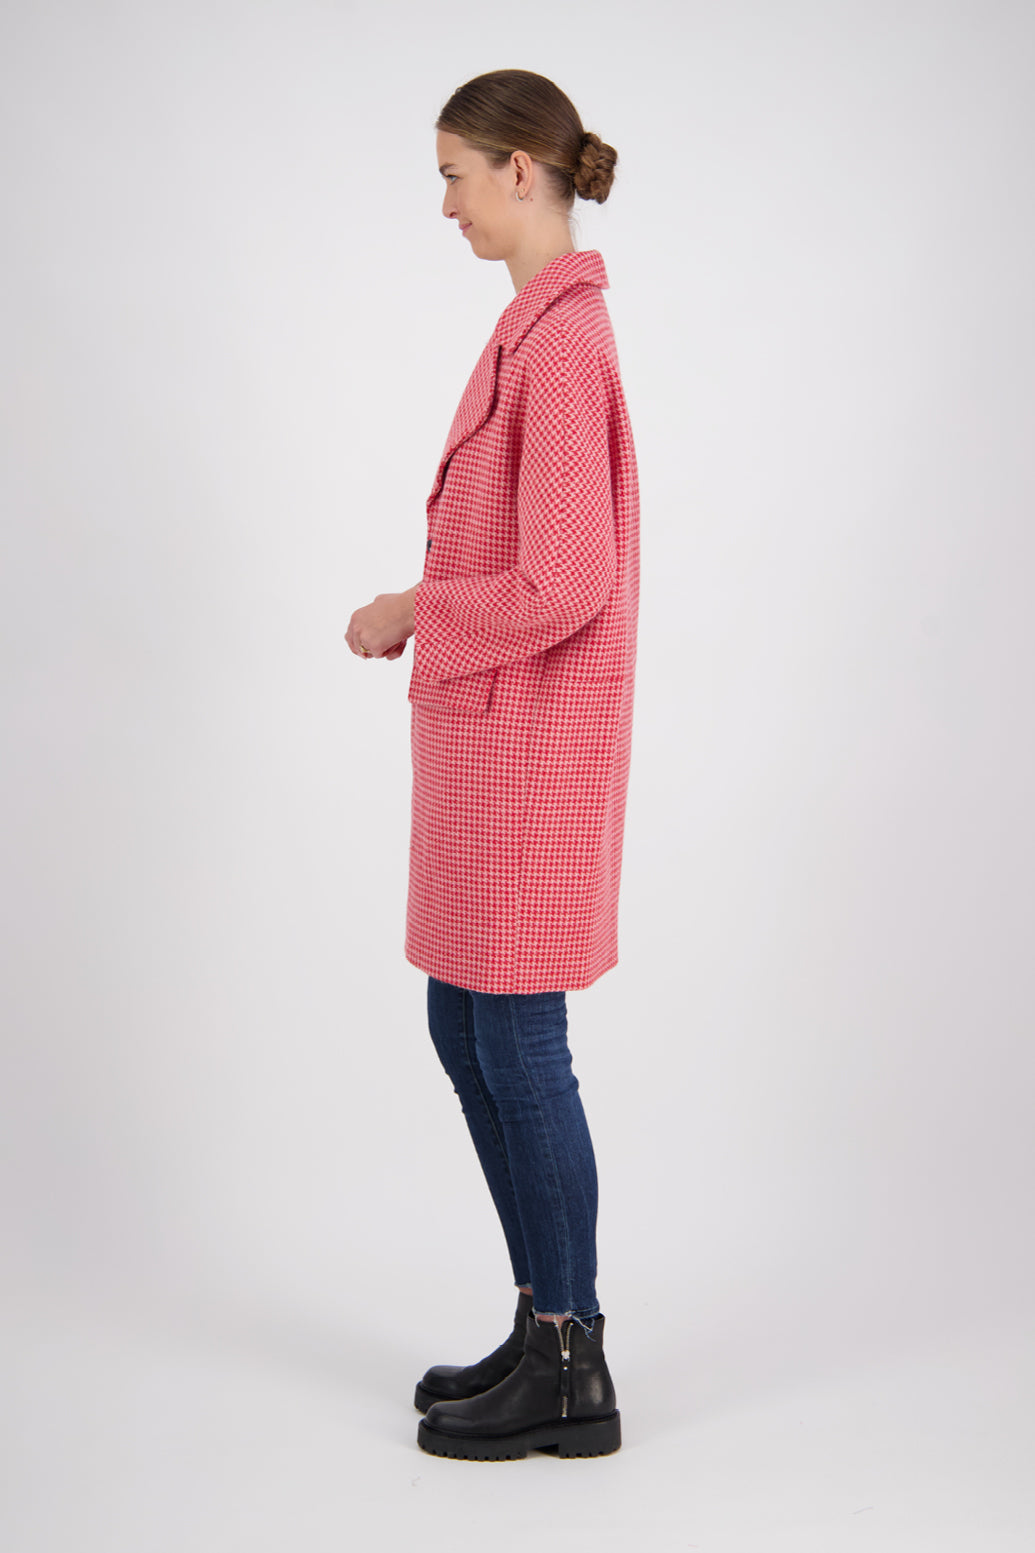 Marlo Wool Blend Coat - Red Houndstooth